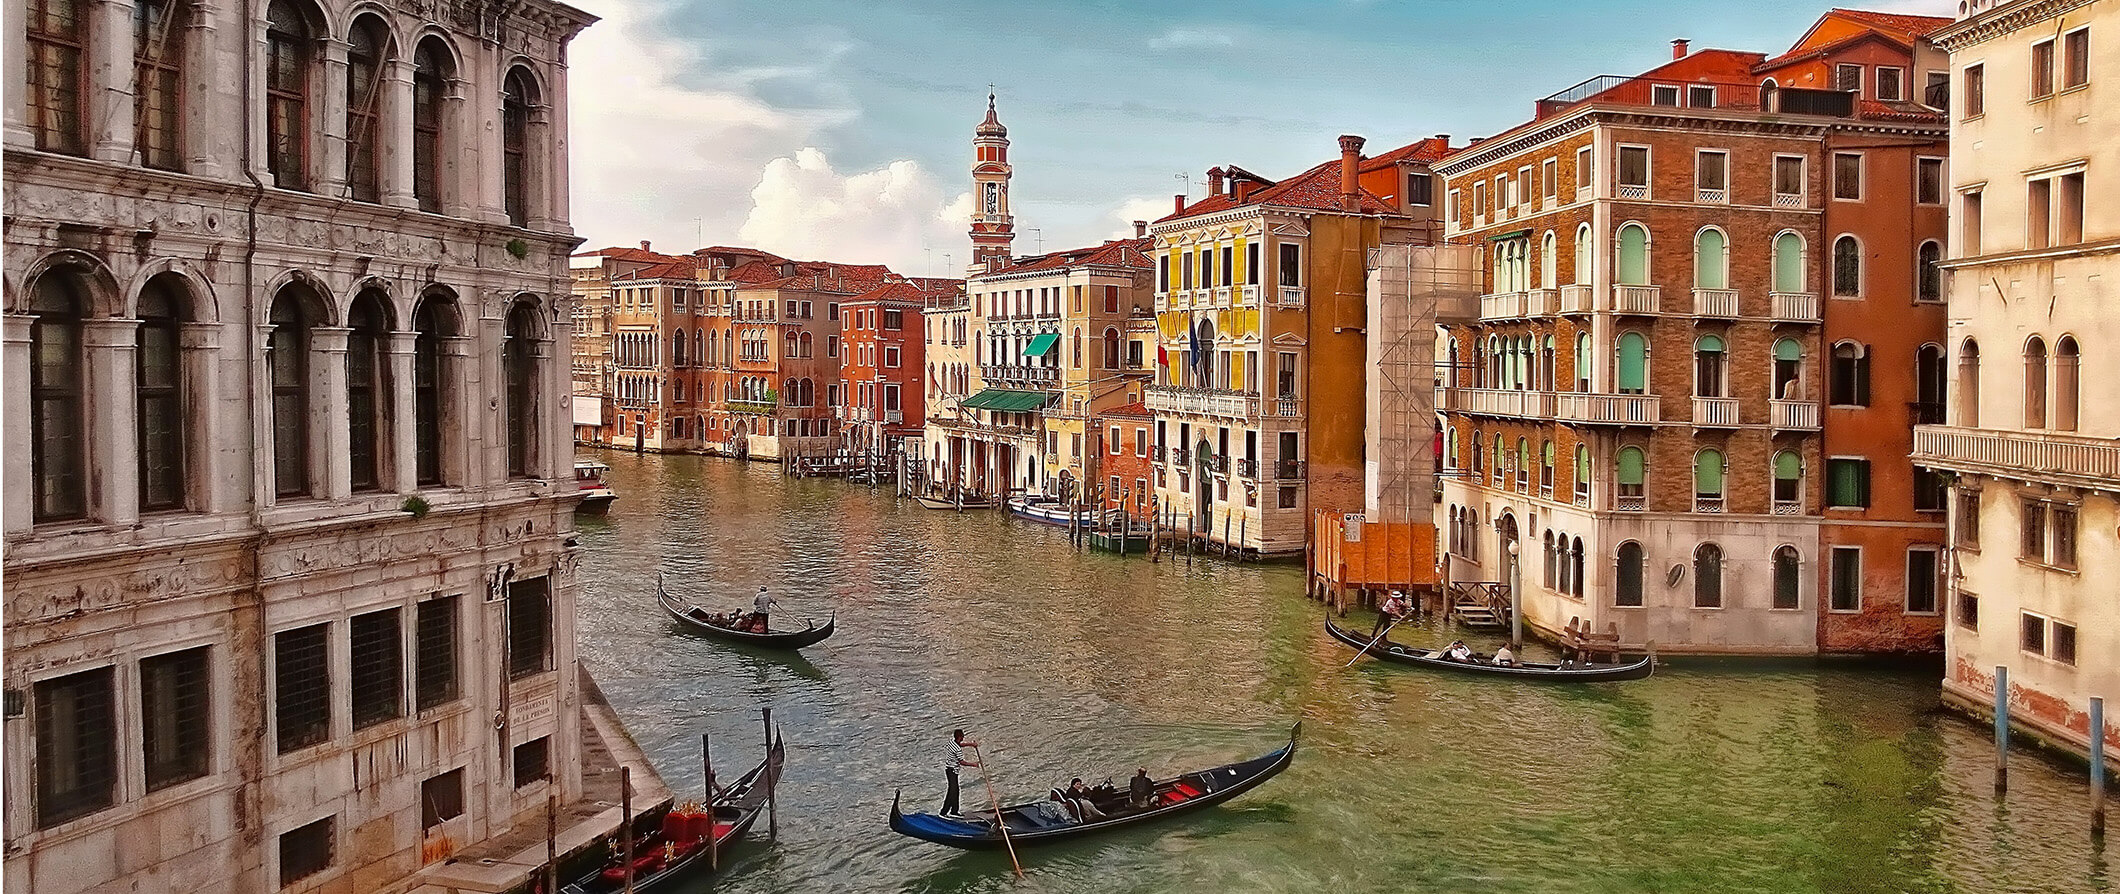 3 Things to Watch Out for in the Private Walking Tour Venice